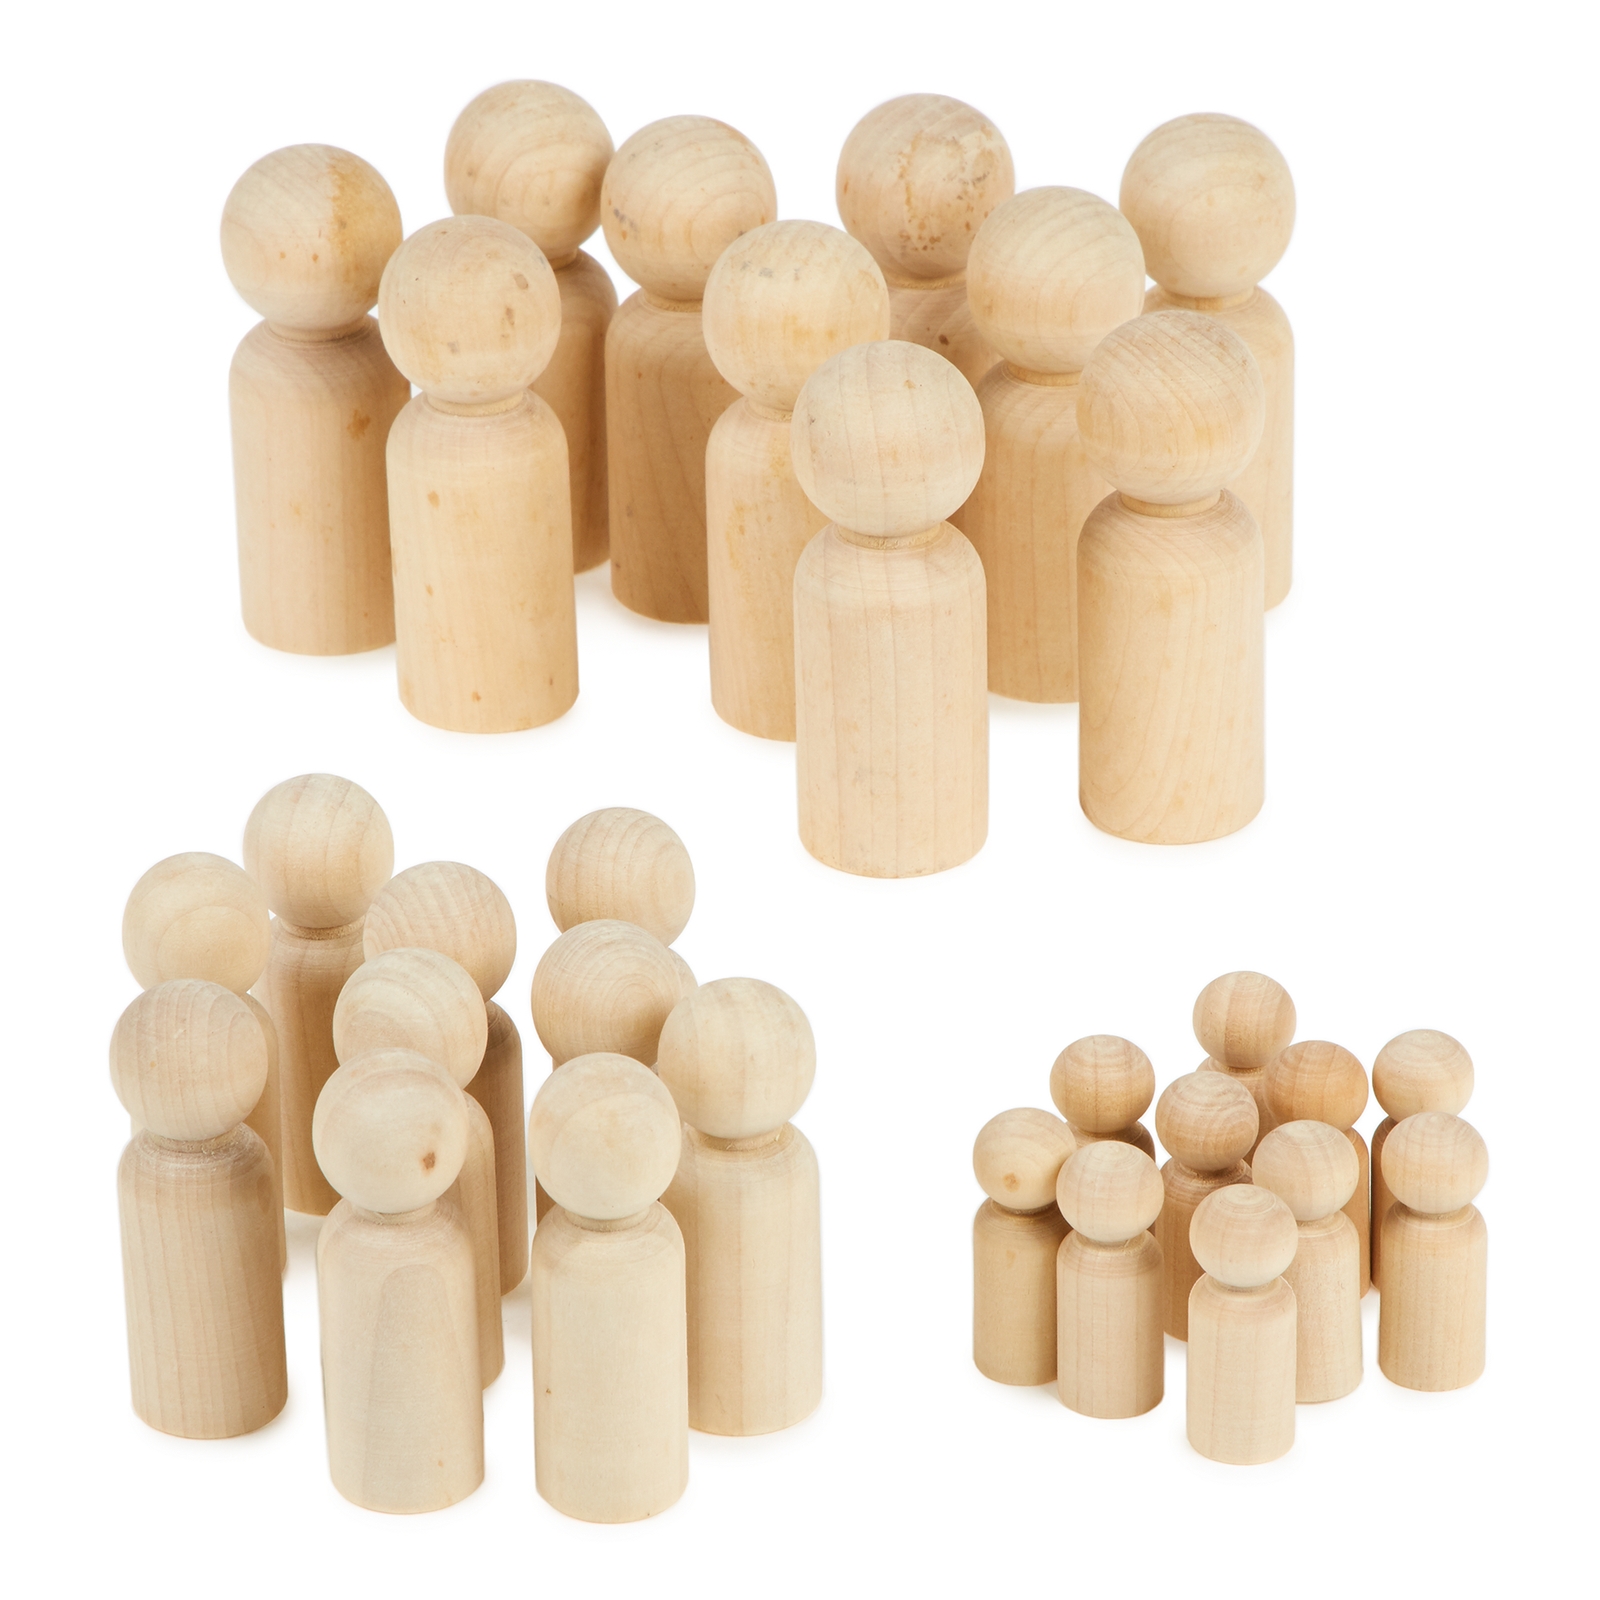 Wooden Peg People Collection - Small, Medium and Large - Pack of 30